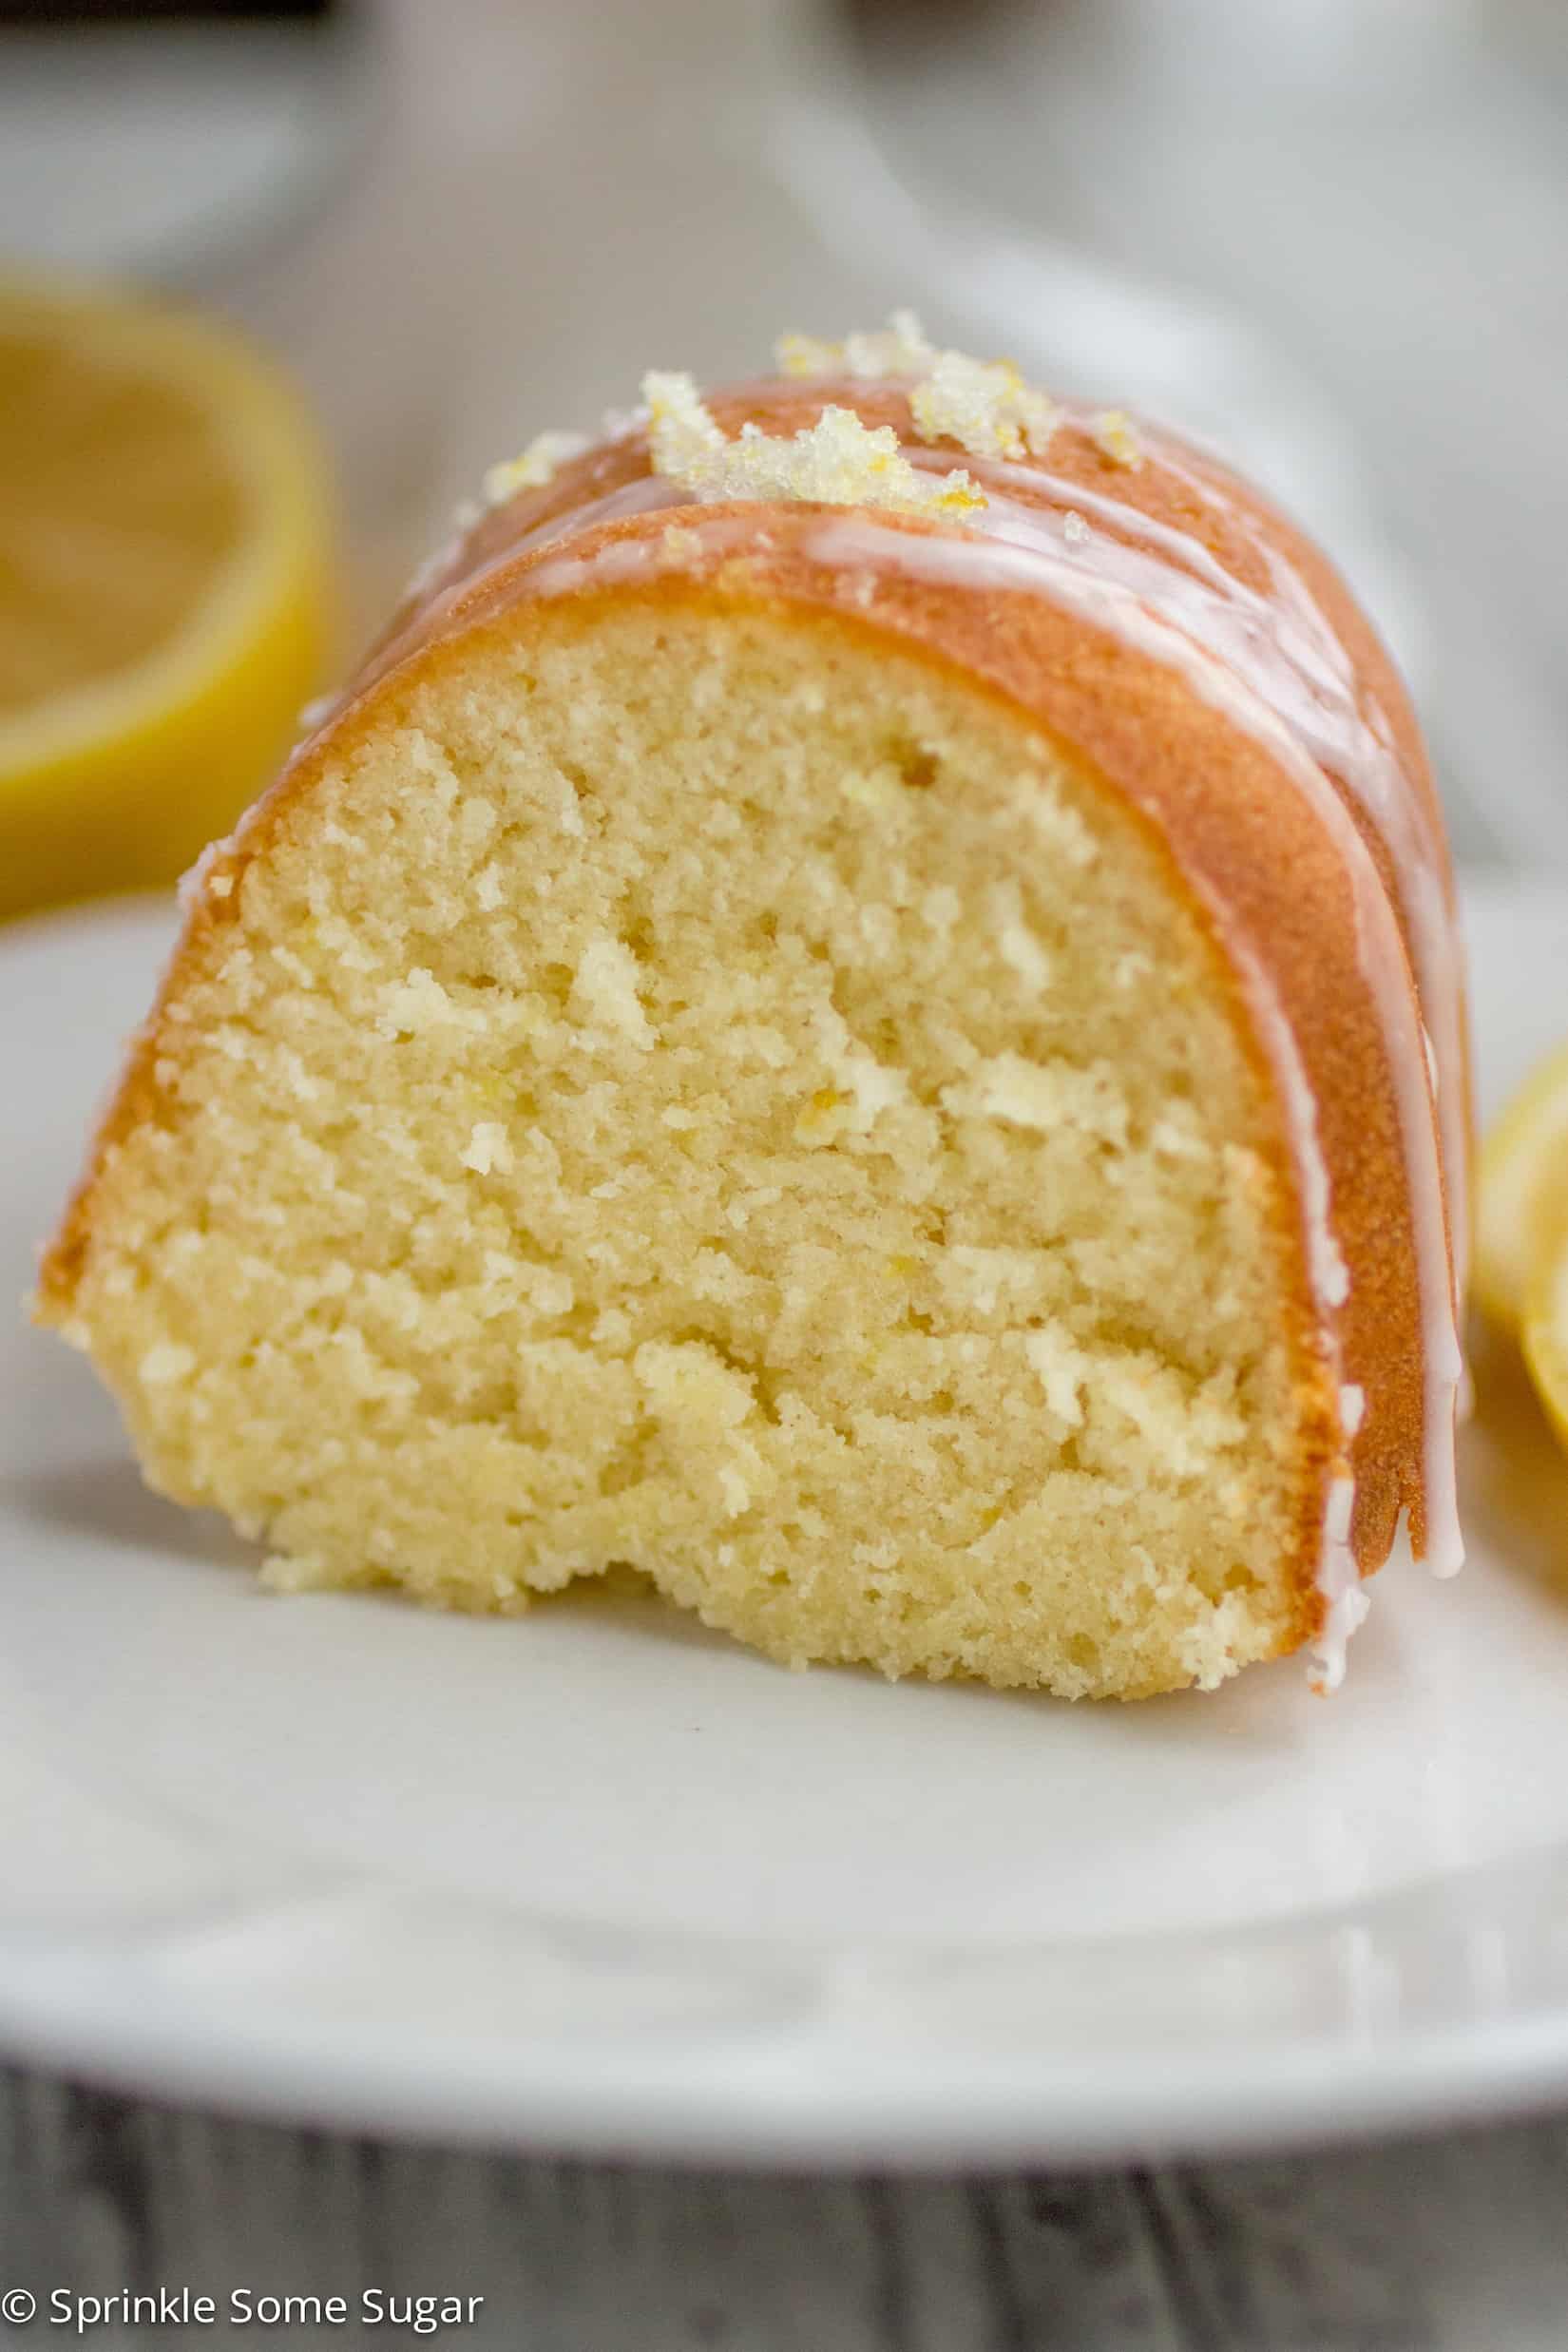 Super Lemon Bundt Cake - The softest, lemon-packed cake on the face of the earth. If you are a lemon lover, this will be your new favorite! 